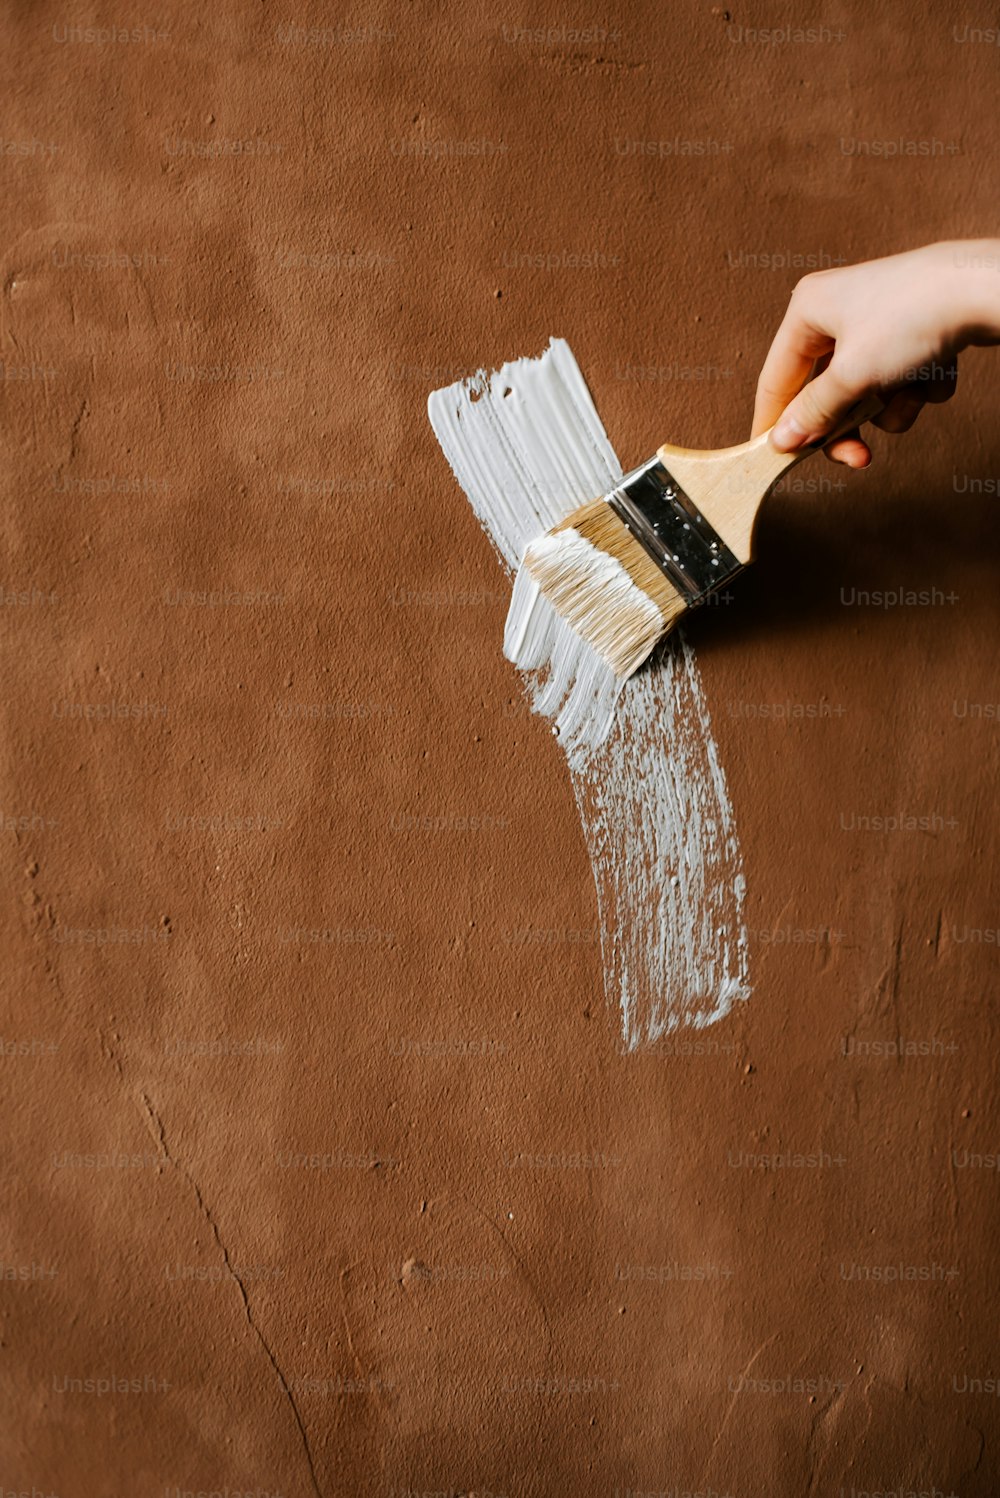 a person holding a paint brush over a brown surface